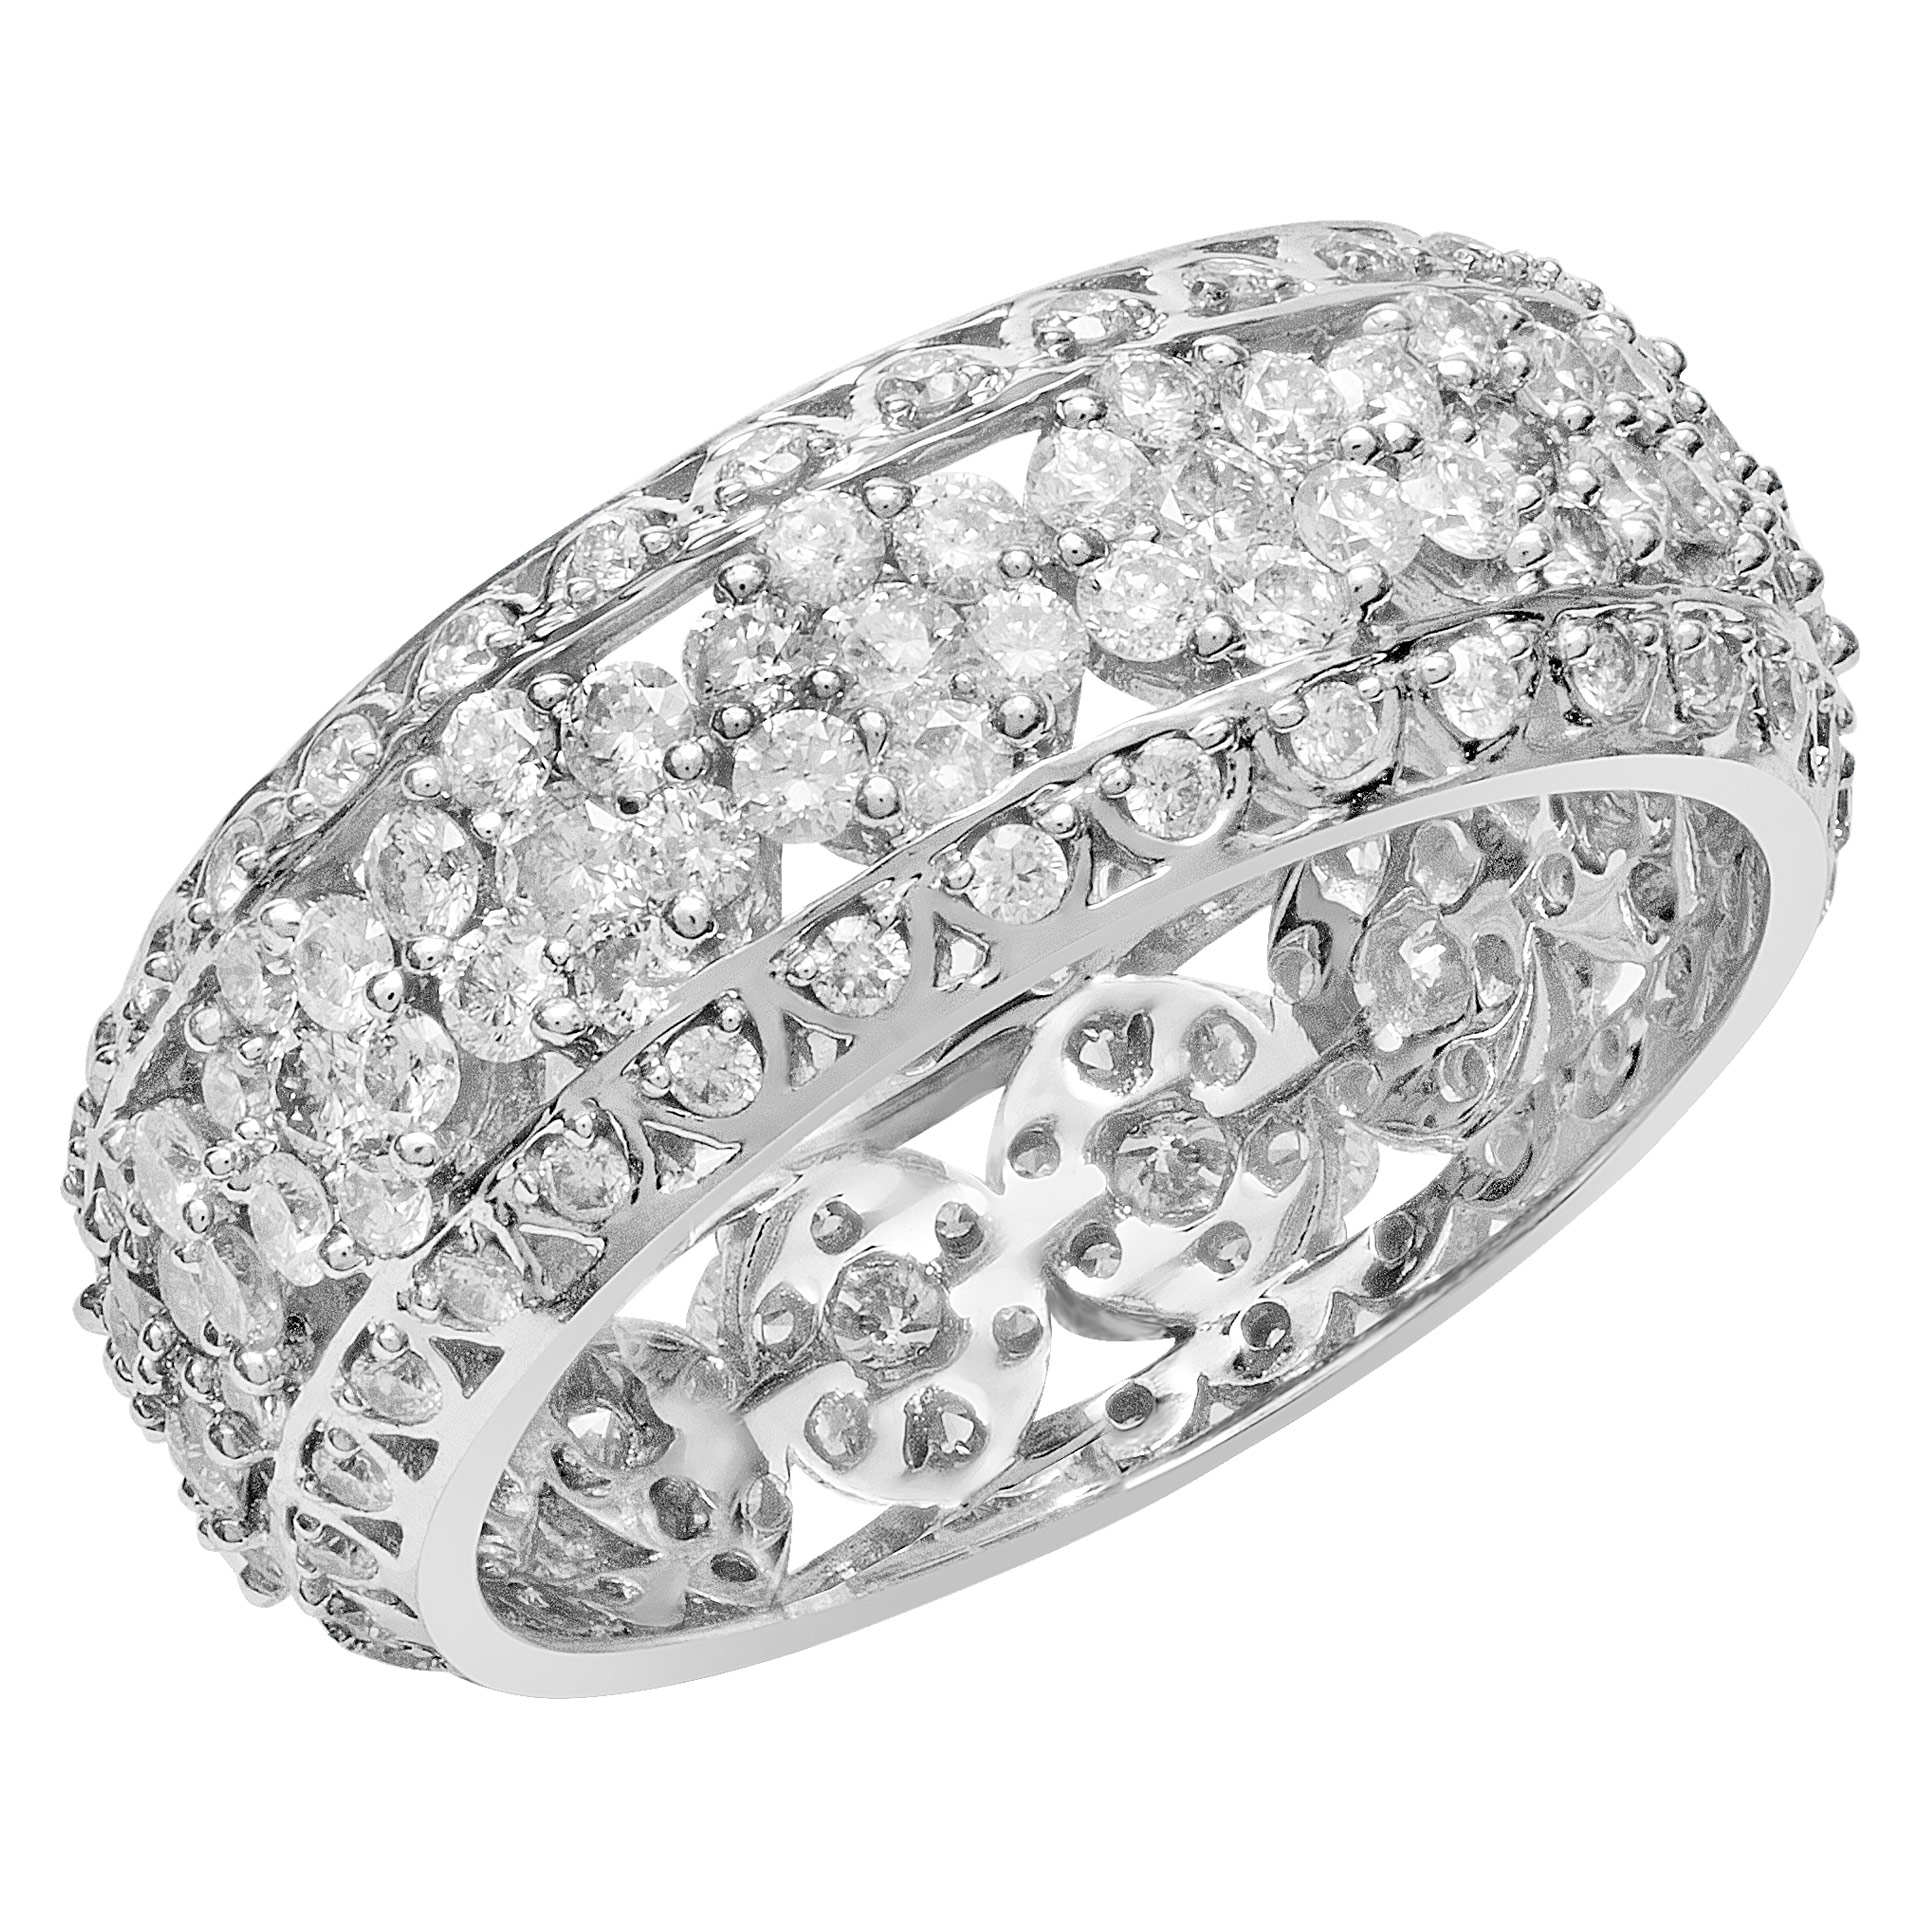 Diamond Eternity Band and Ring Charming Floral. 3.00 carats in diamonds. Size 9 image 2